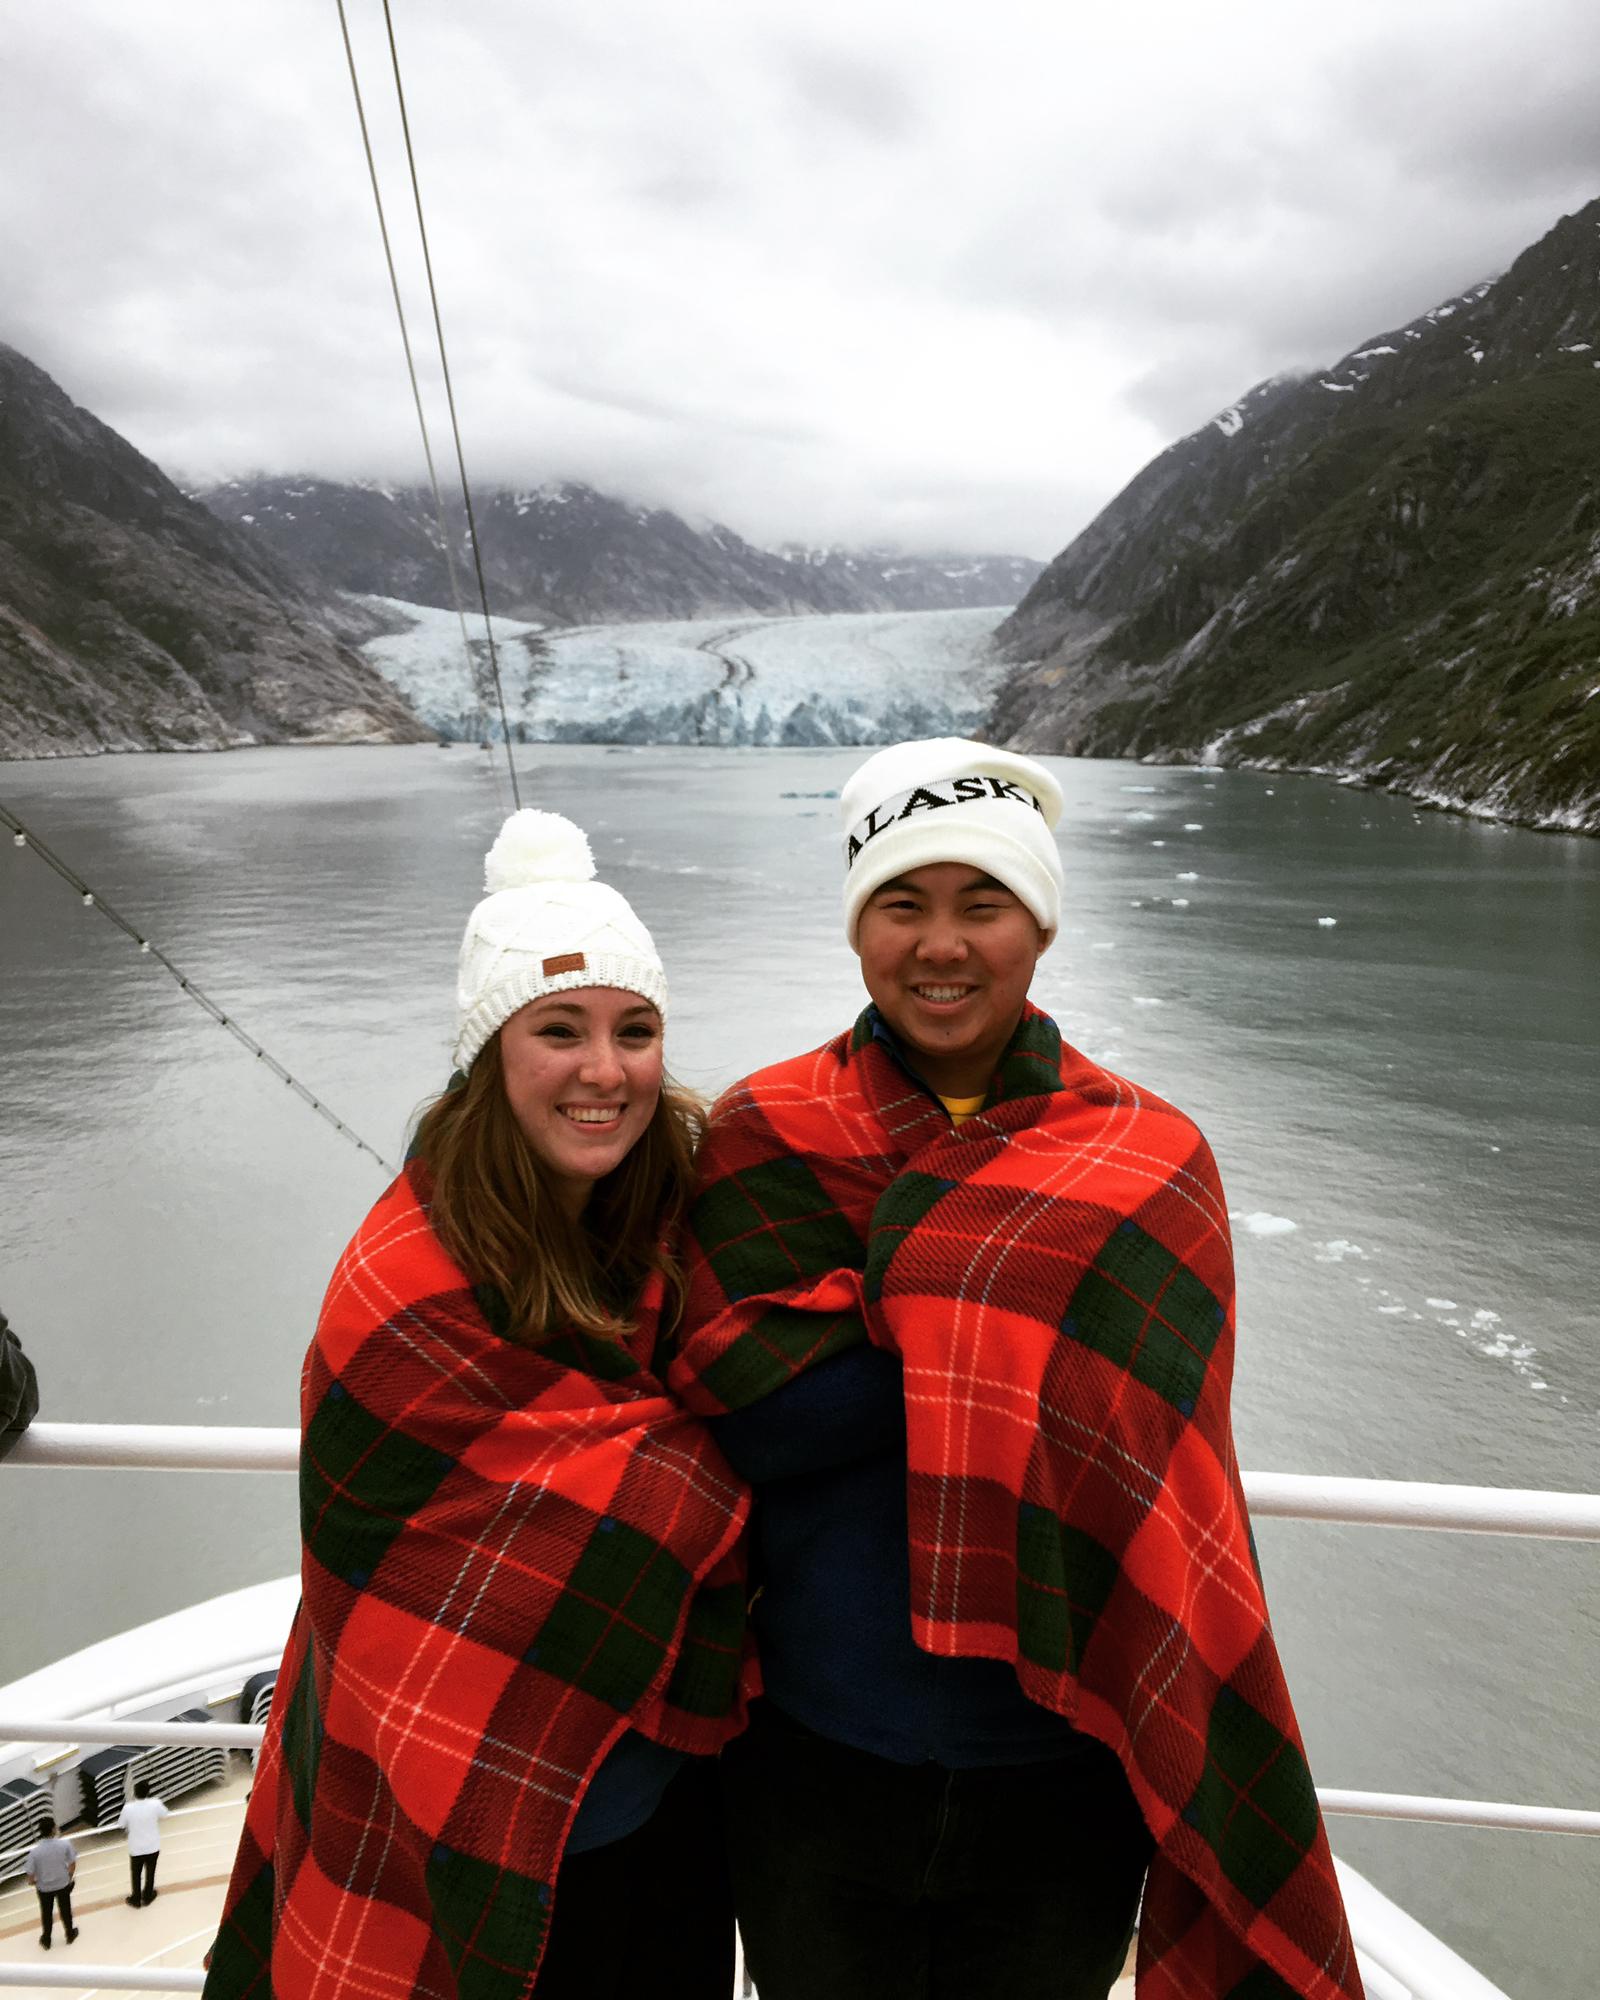 On a cruise to Alaska, with a glacier in May 2017